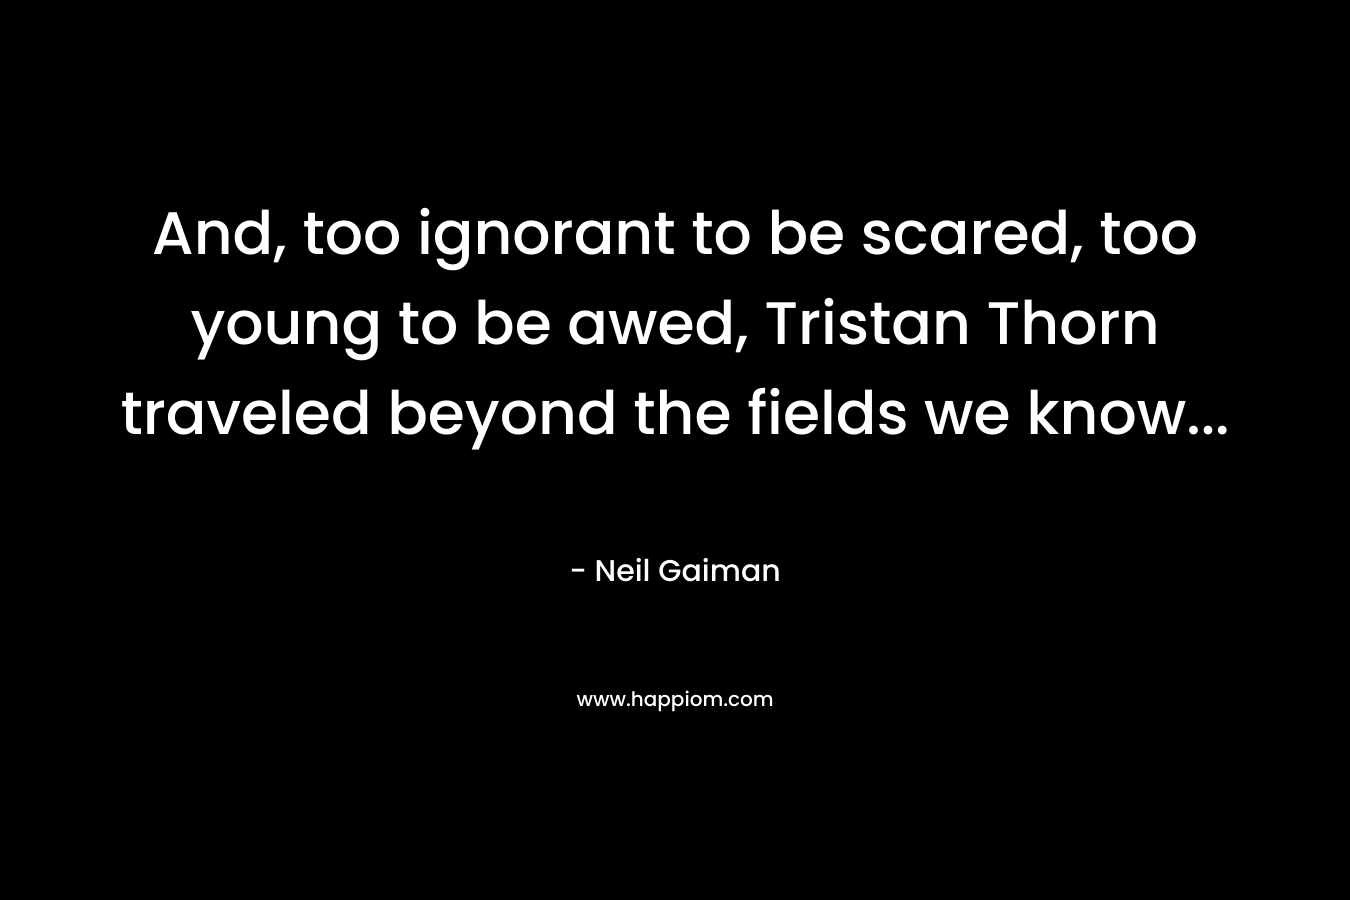 And, too ignorant to be scared, too young to be awed, Tristan Thorn traveled beyond the fields we know...